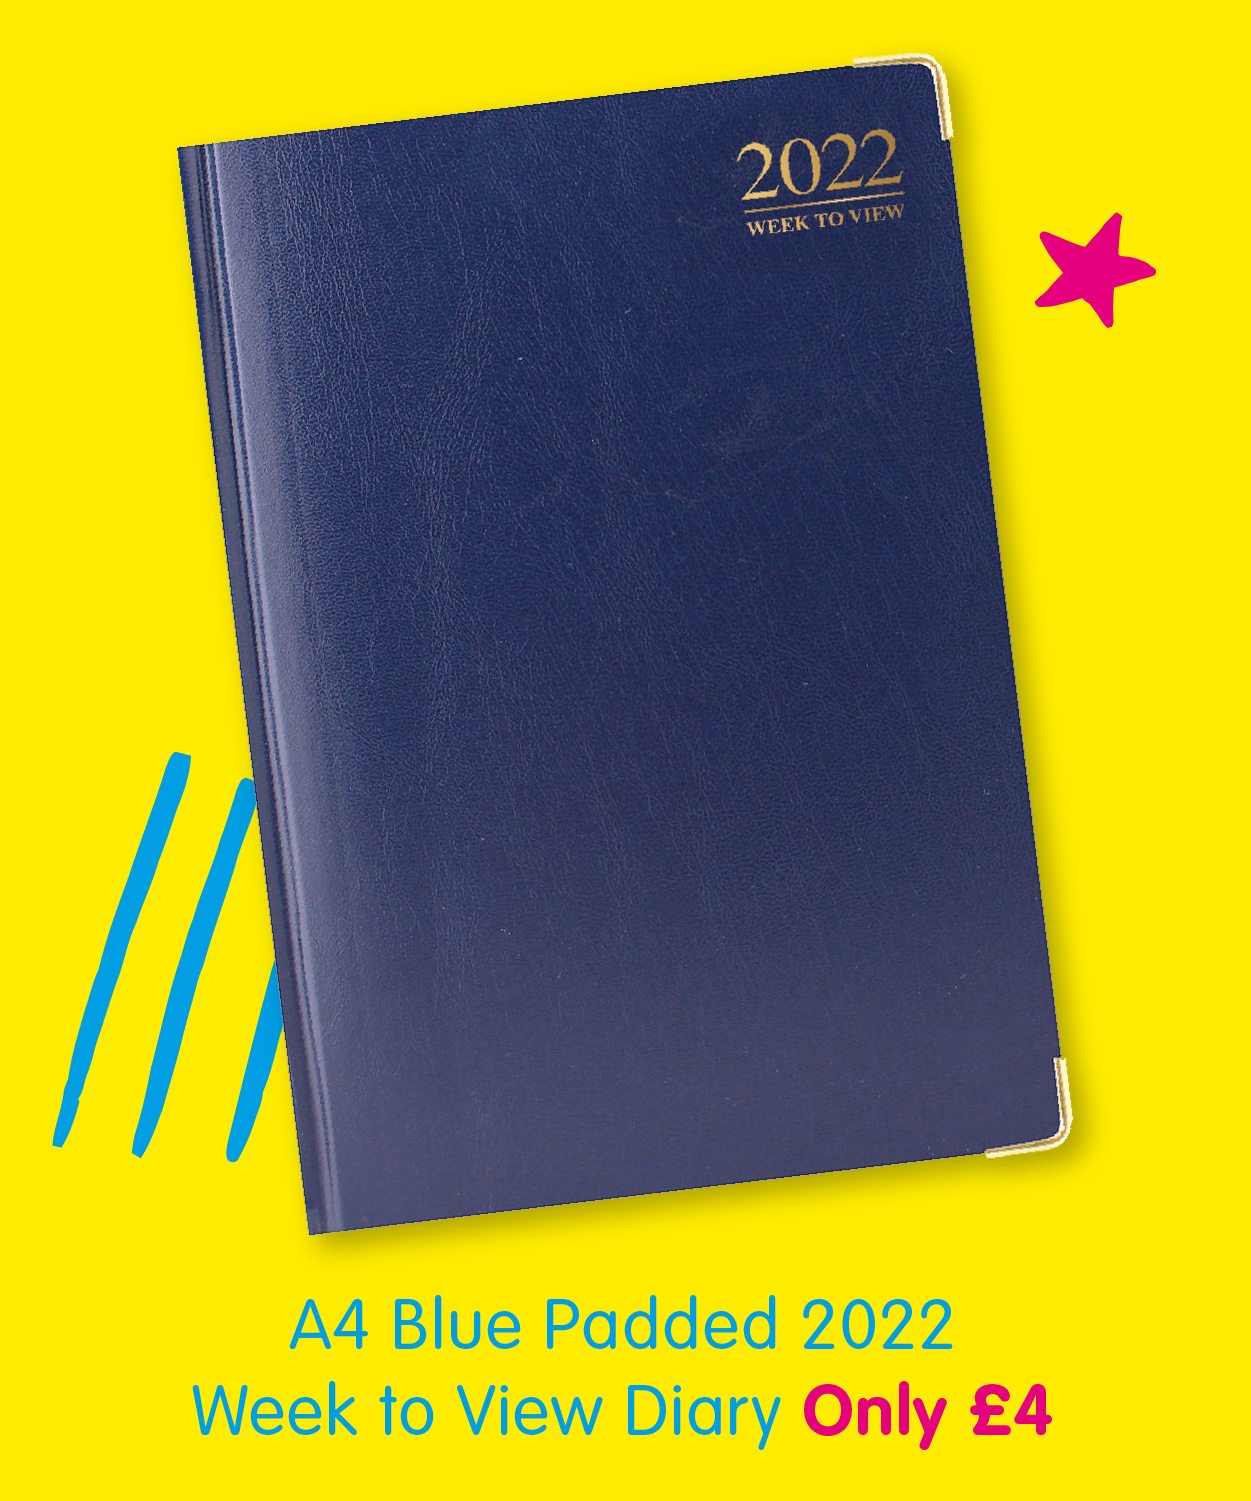 A4 Blue Padded 2022 Week to View Diary